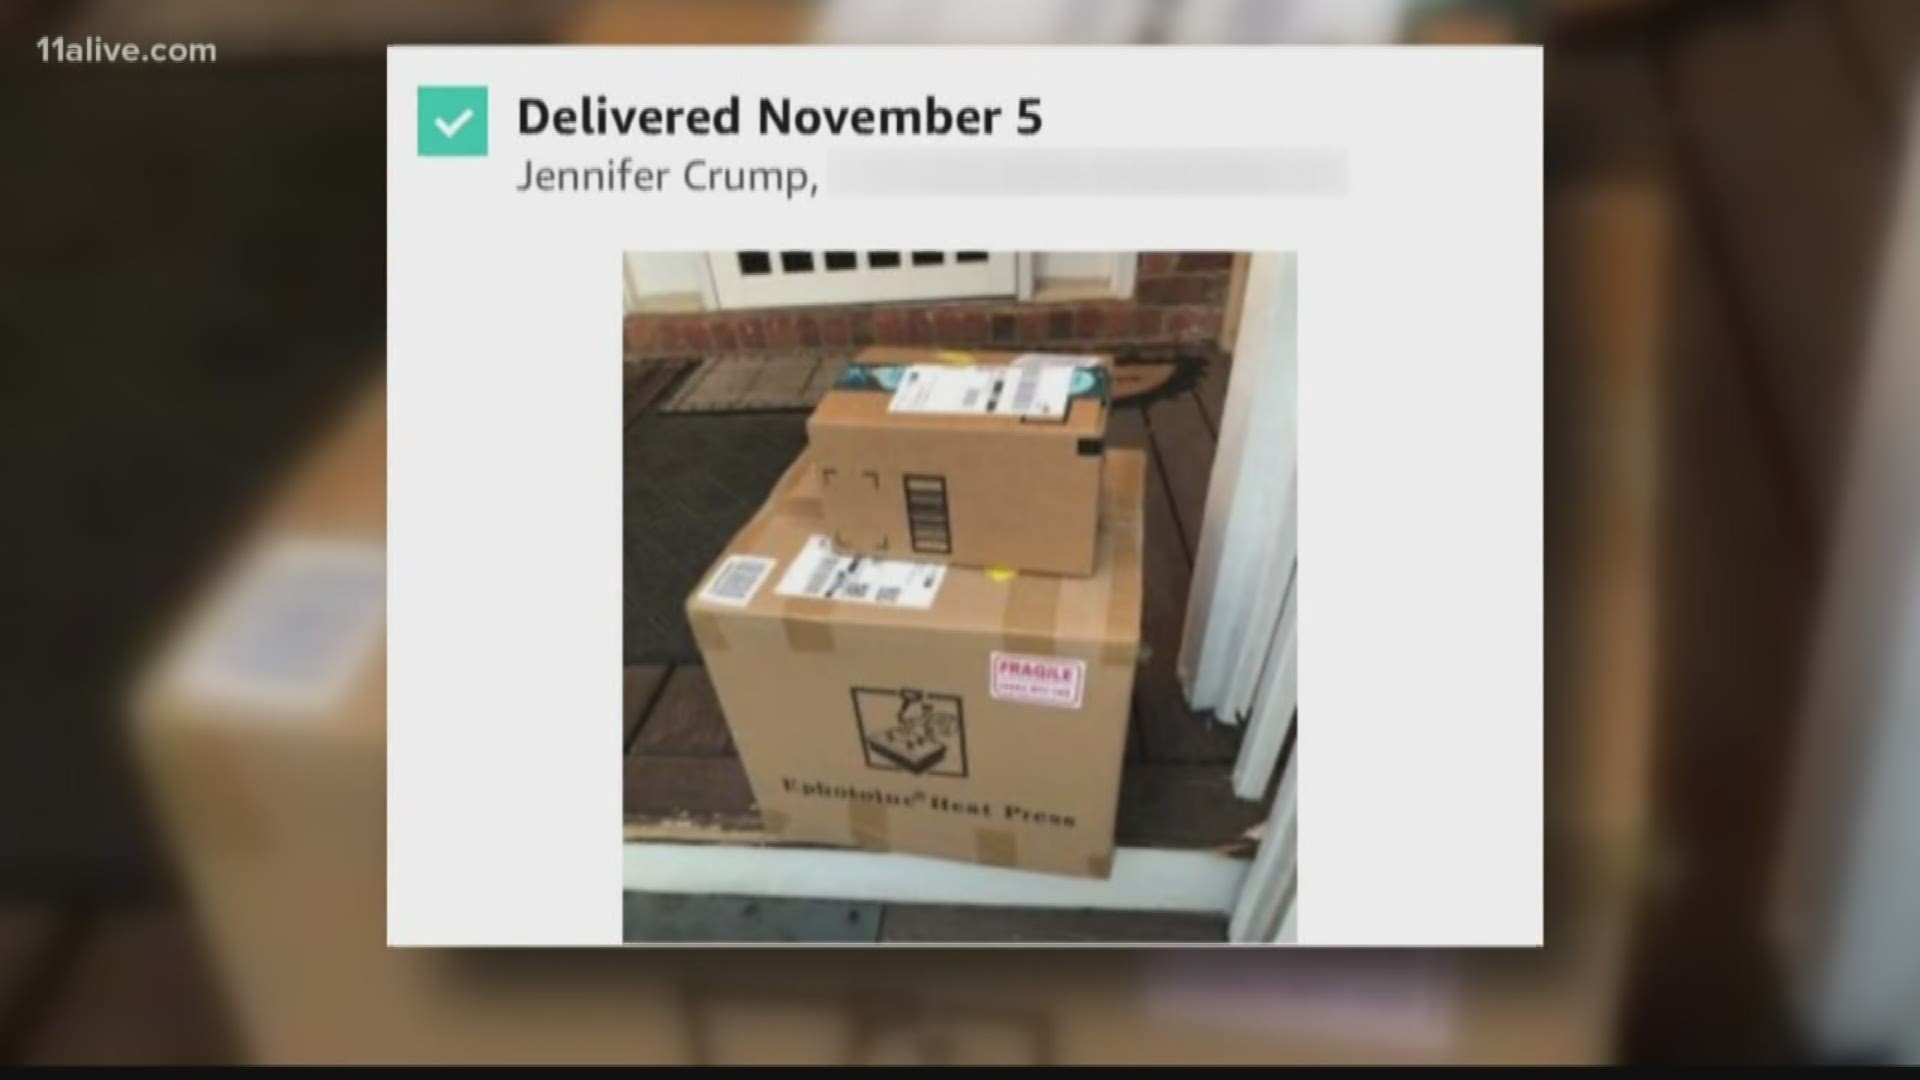 She reported all of this to Amazon and is getting ready to file a police report.